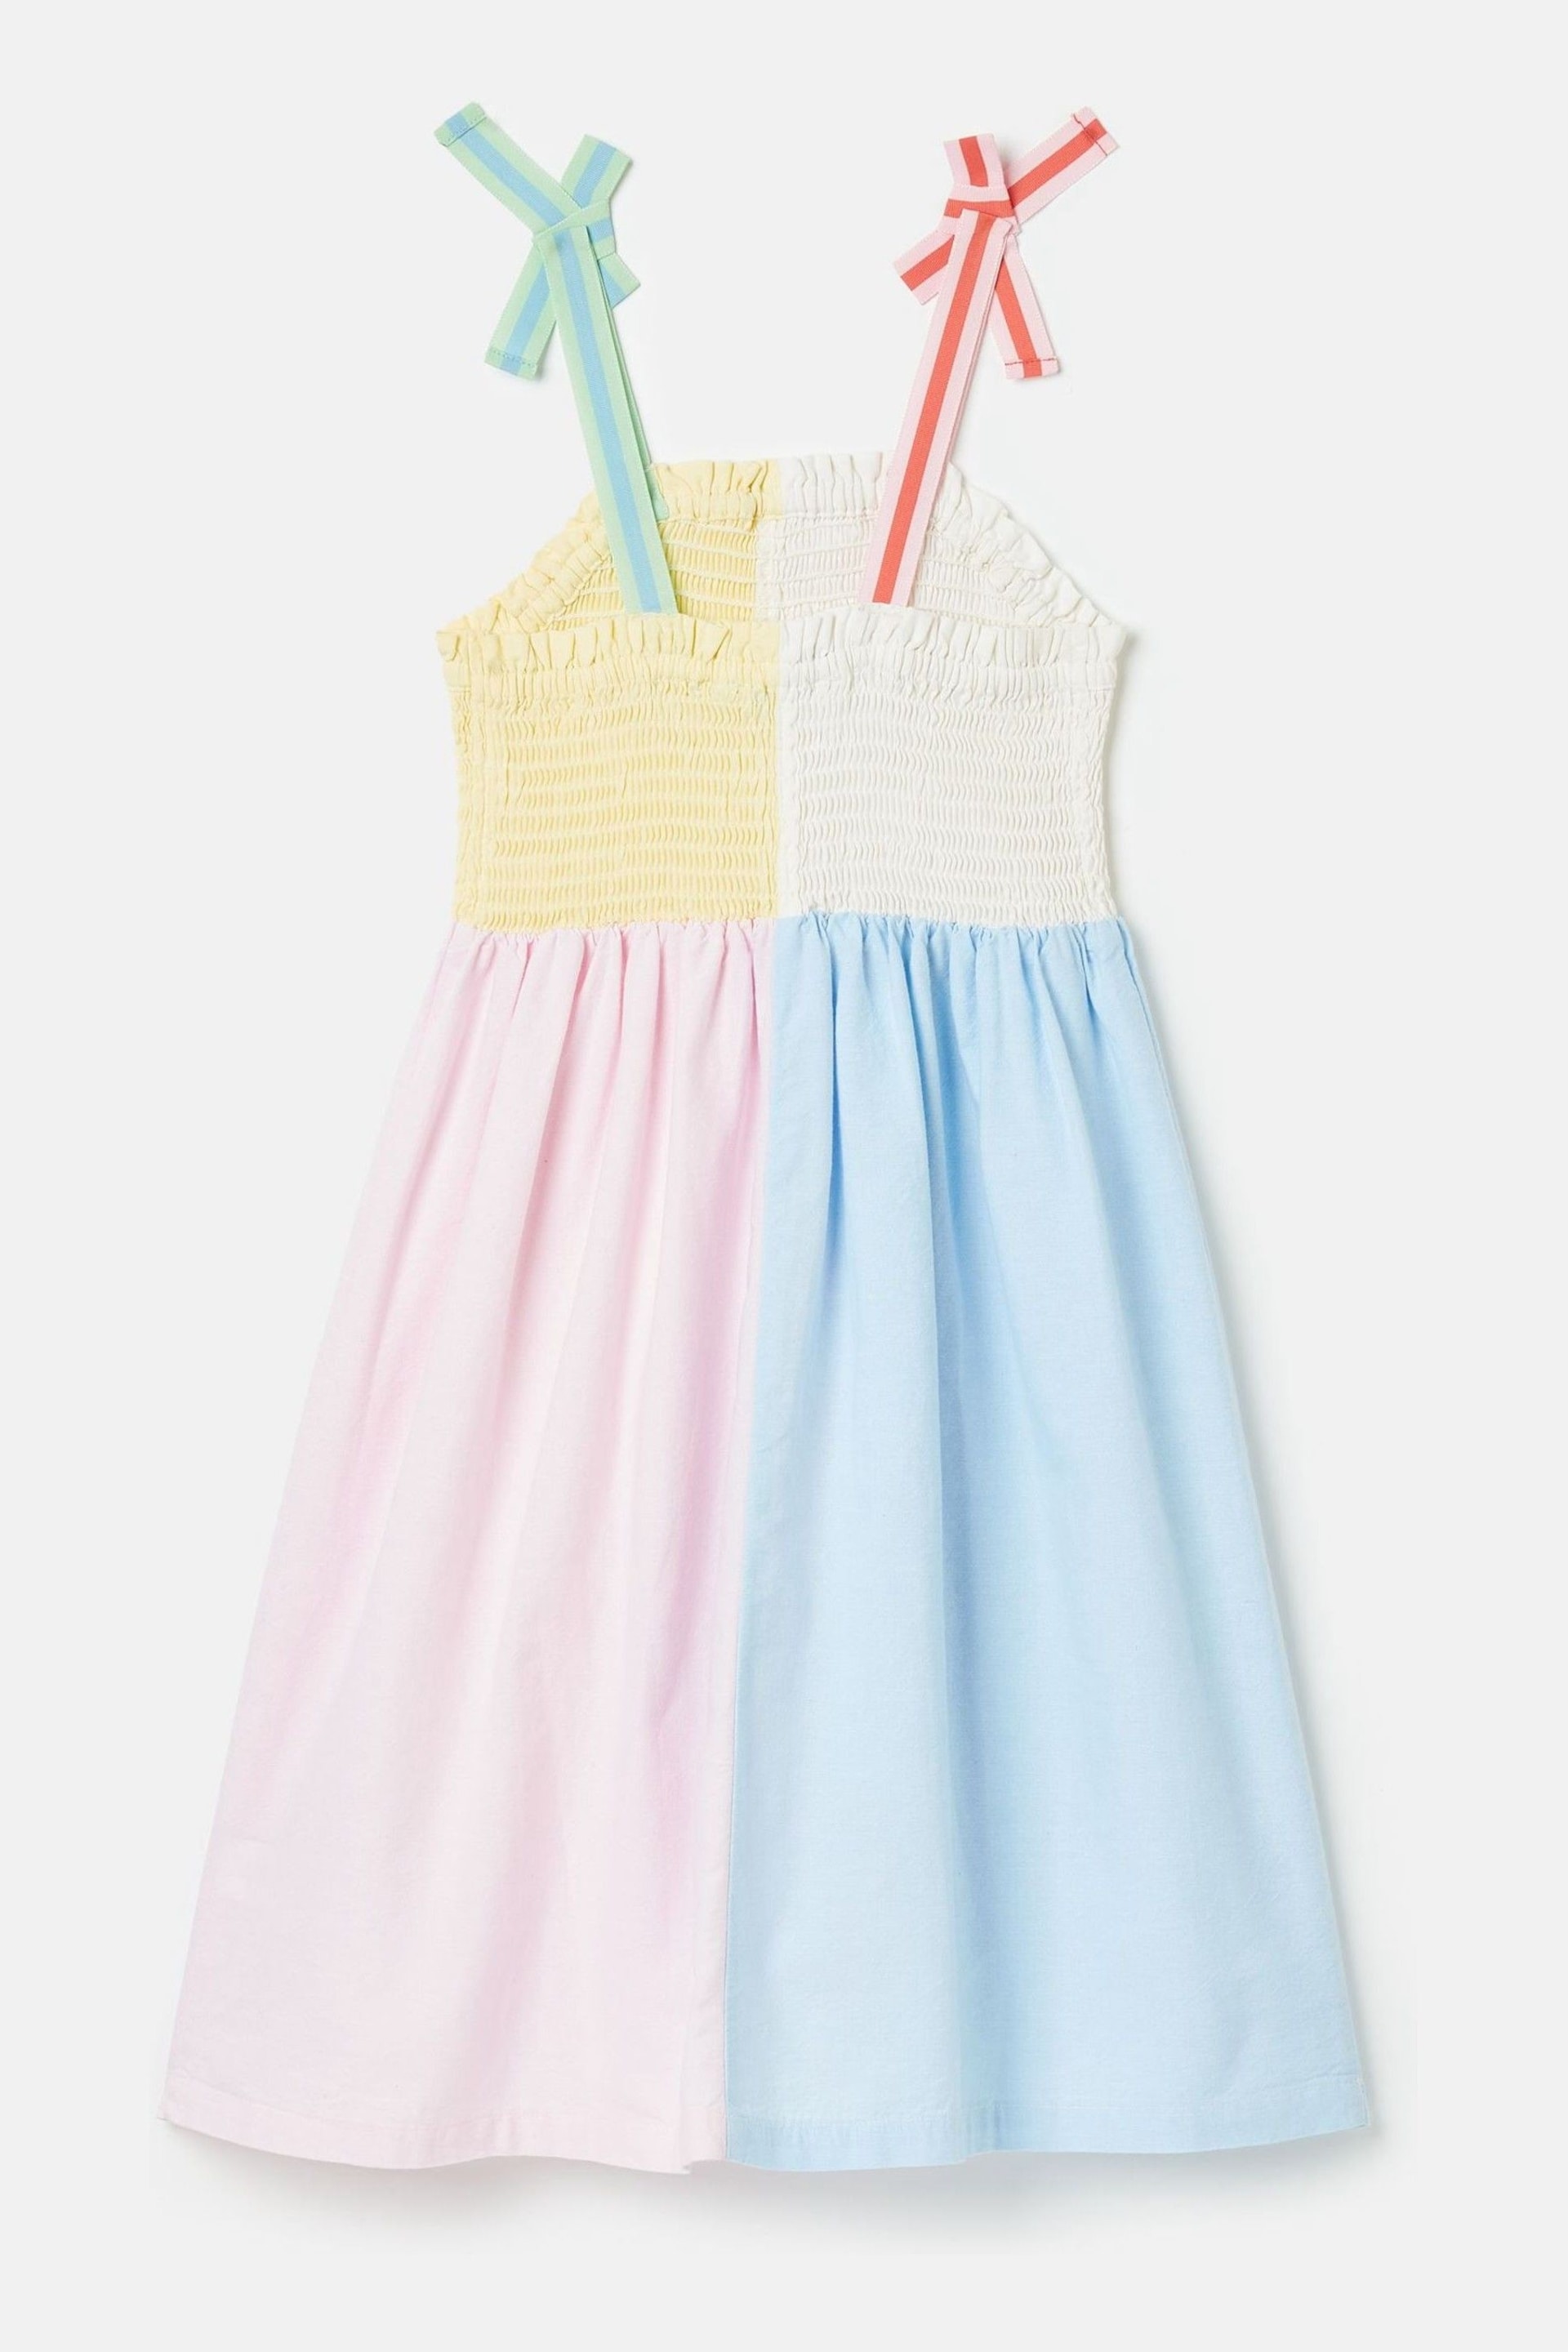 Joules Pretty As A Picture Multi Colour Sundress - Image 5 of 8